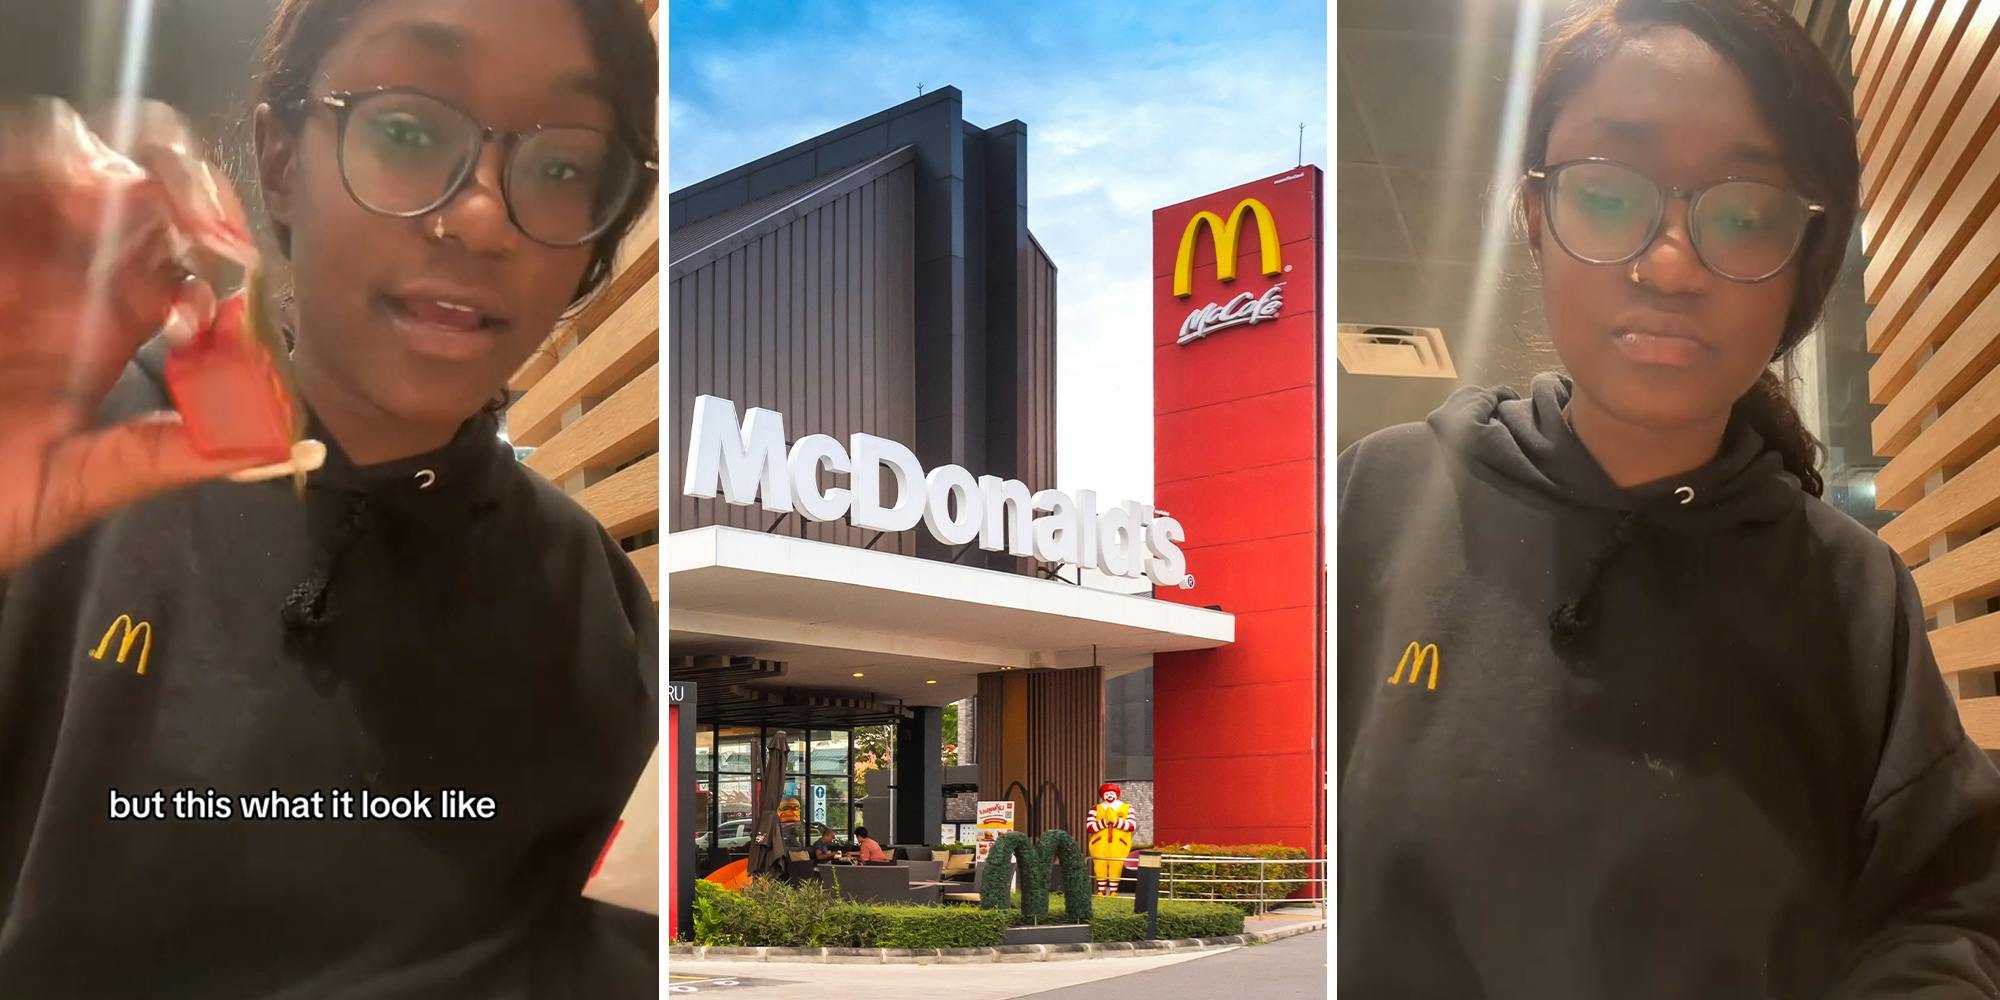 McDonald’s worker tries new WcDonald’s sauce. What is it?